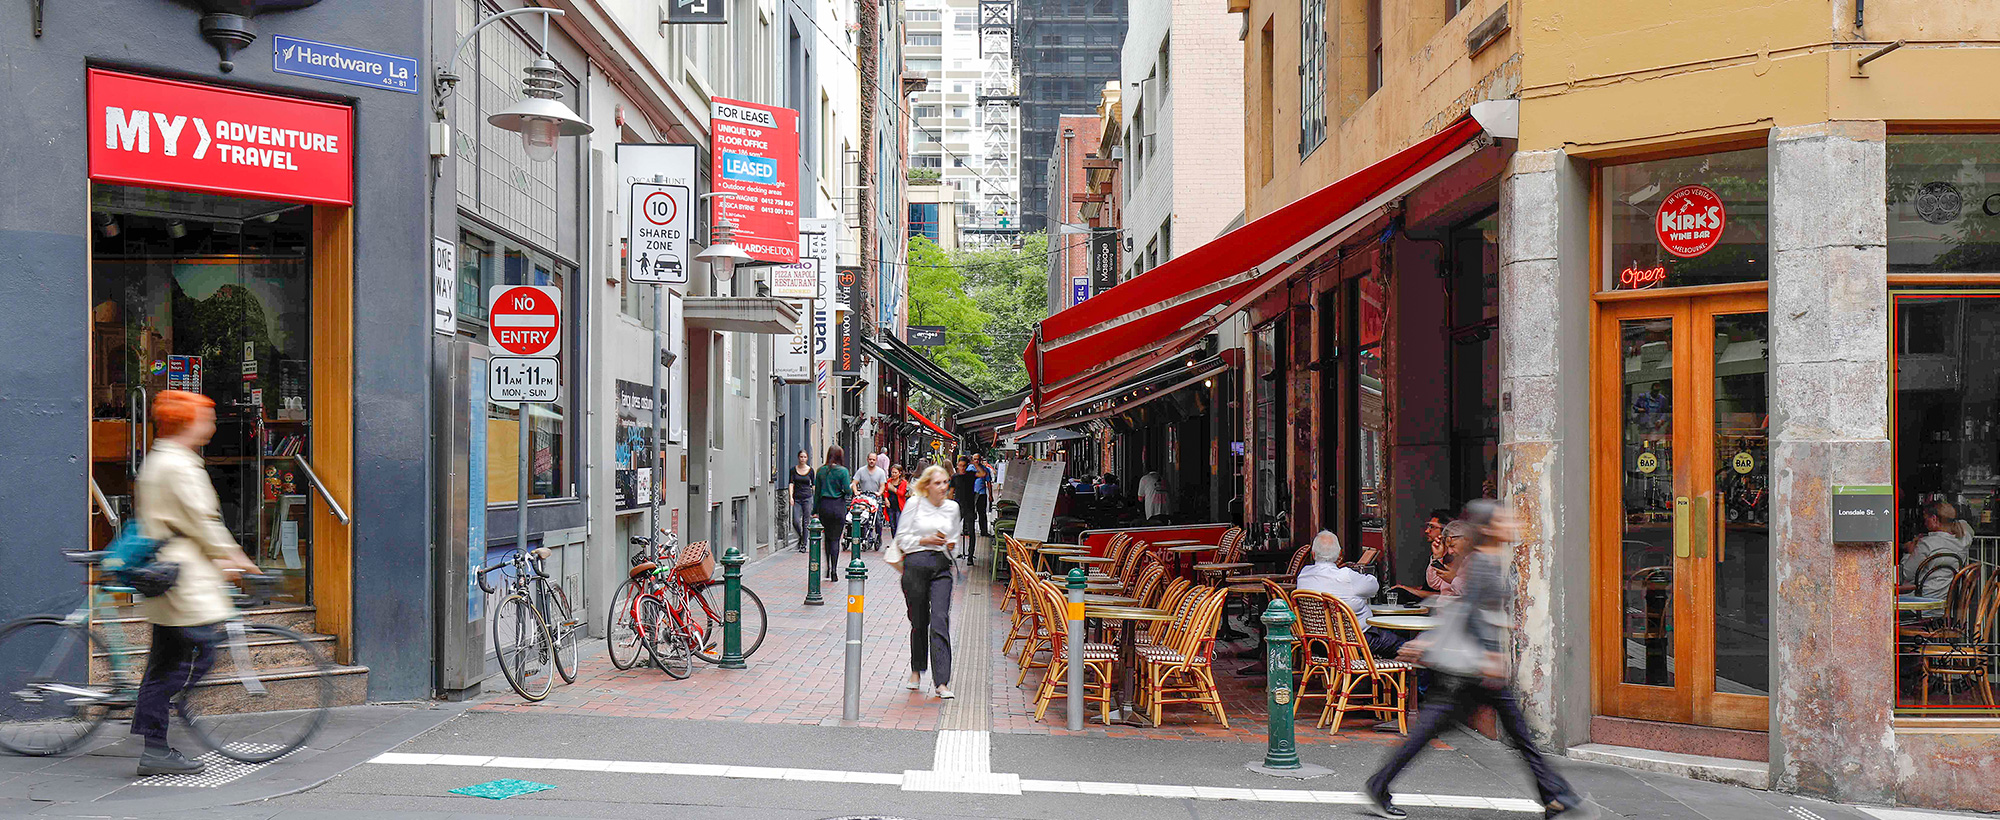 Guildford and Hardware Laneways Heritage Study